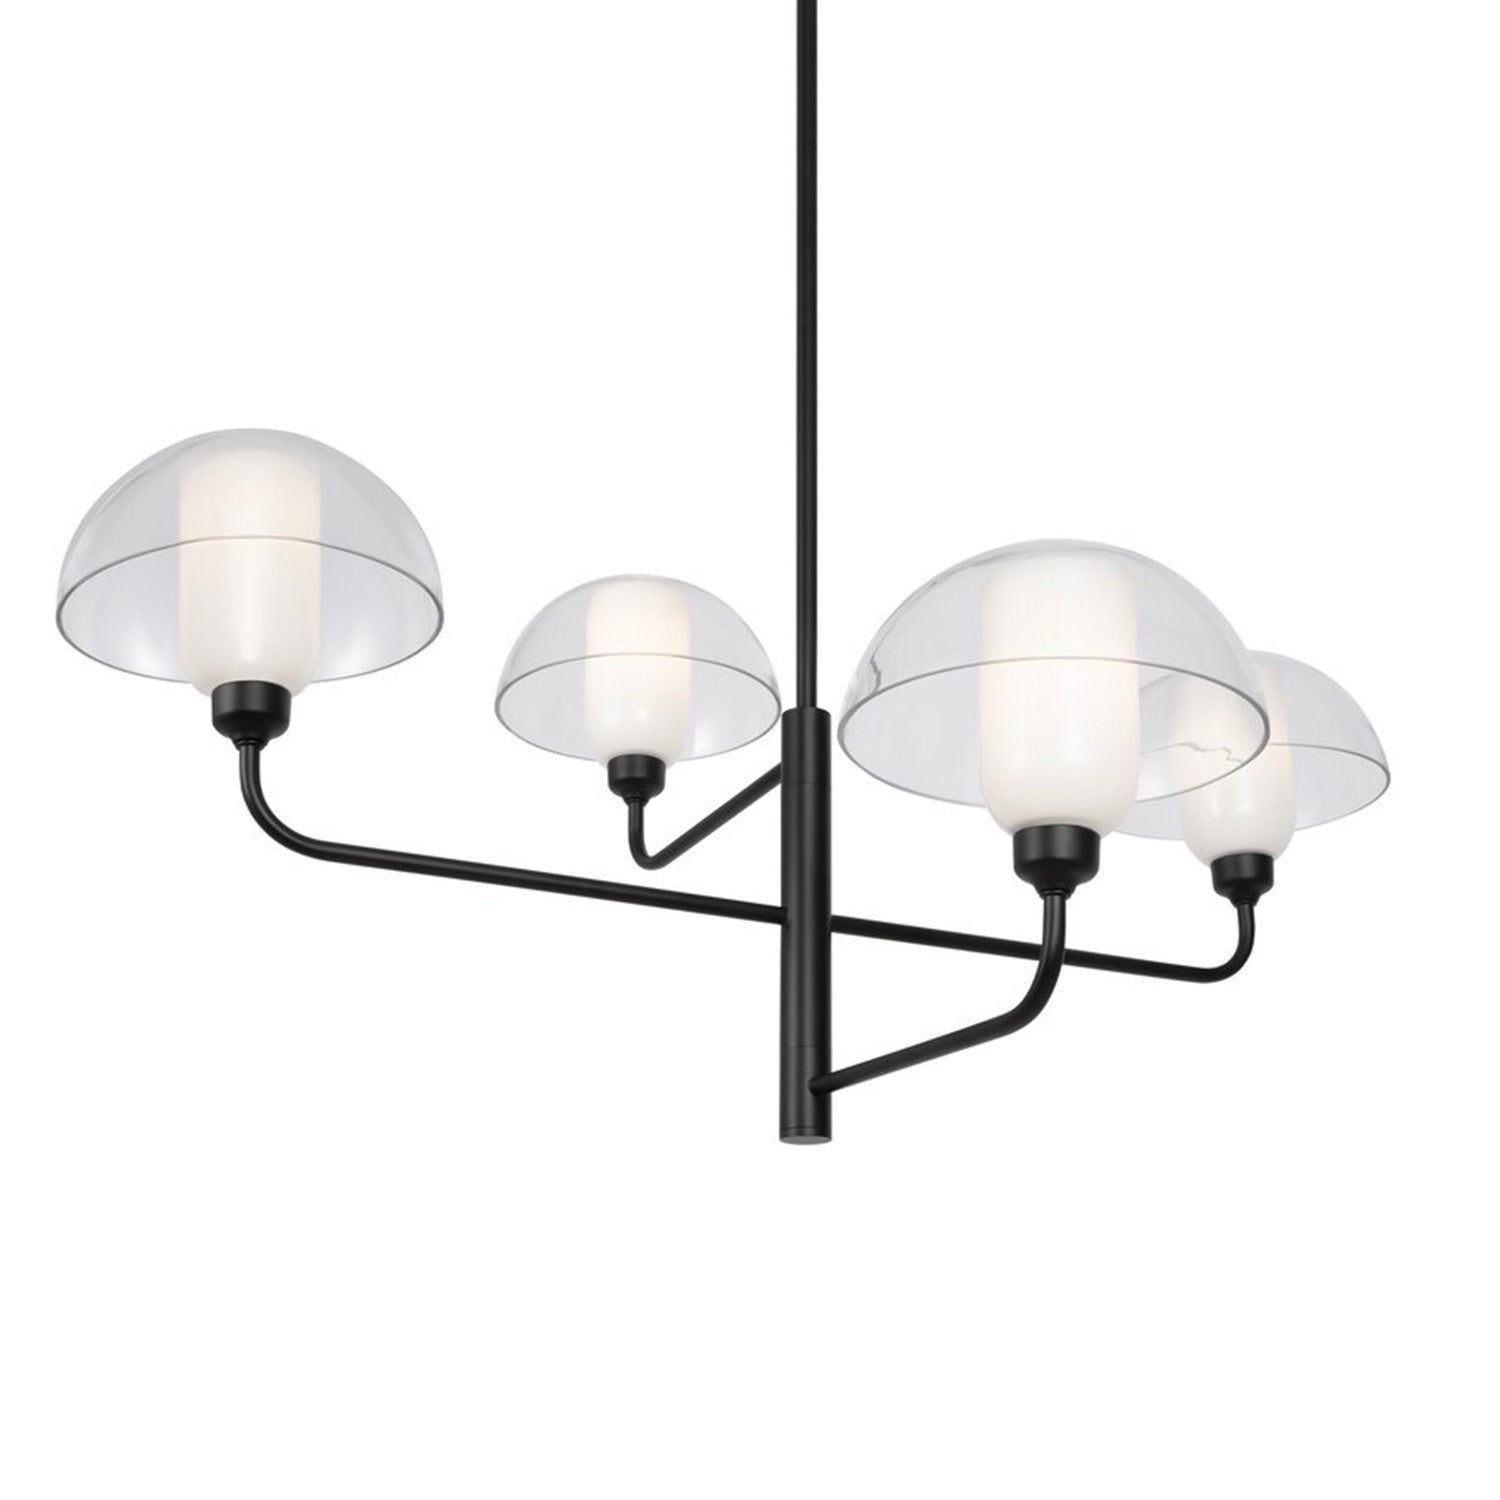 MEMORY - Chic and modern chandelier in black steel and glass